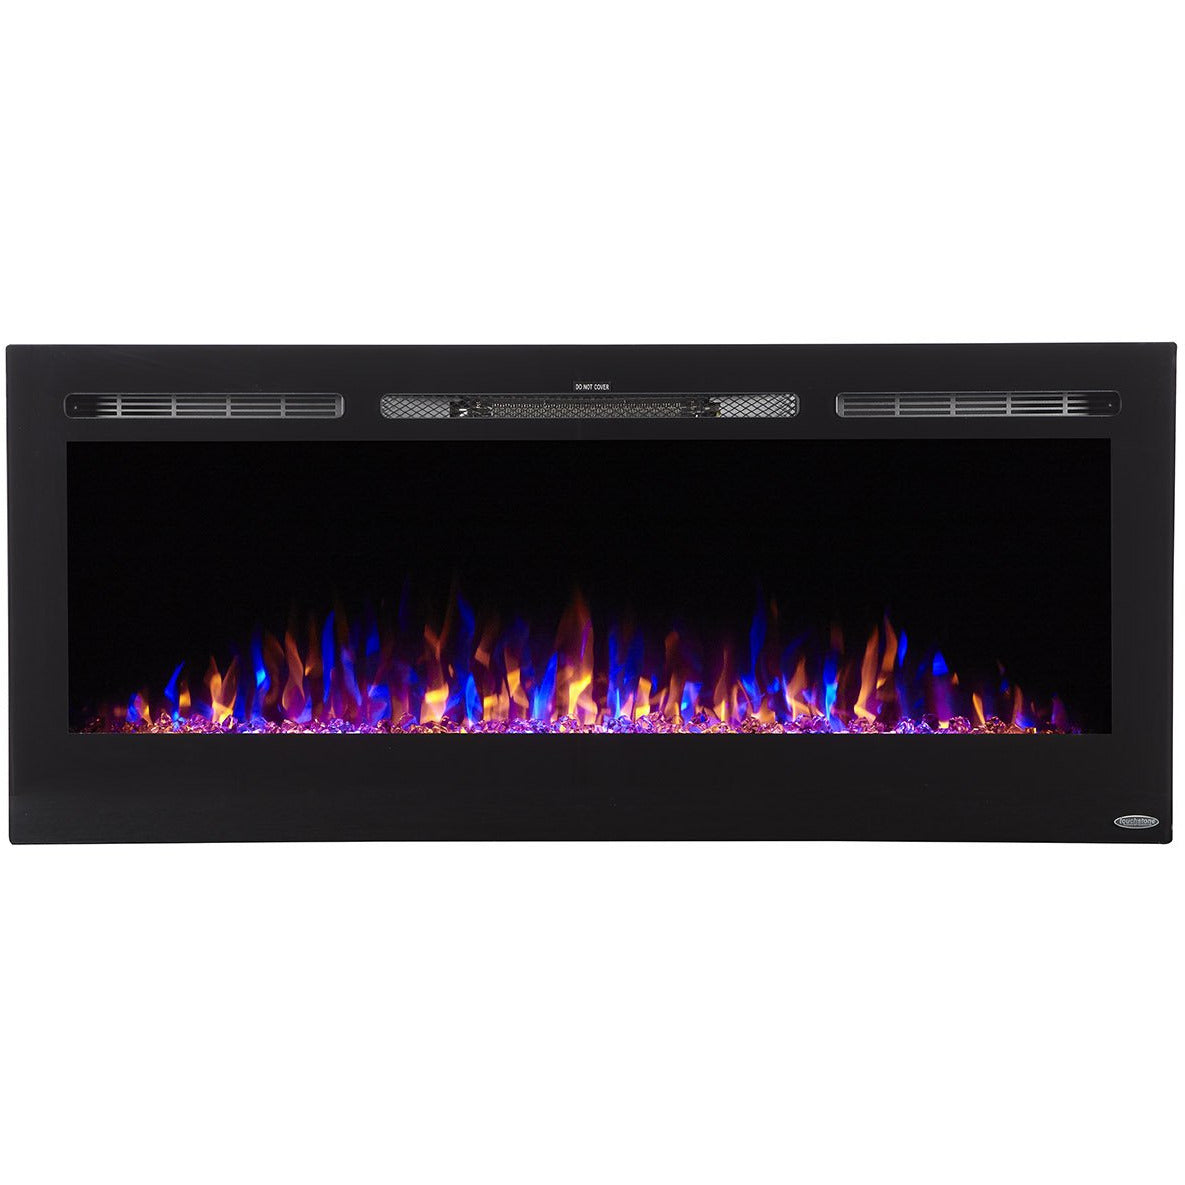 Multiple Flame Colors of Touchstone Sideline 50" Recessed Mounted Black Frame Electric Fireplace | Very Good Fireplaces